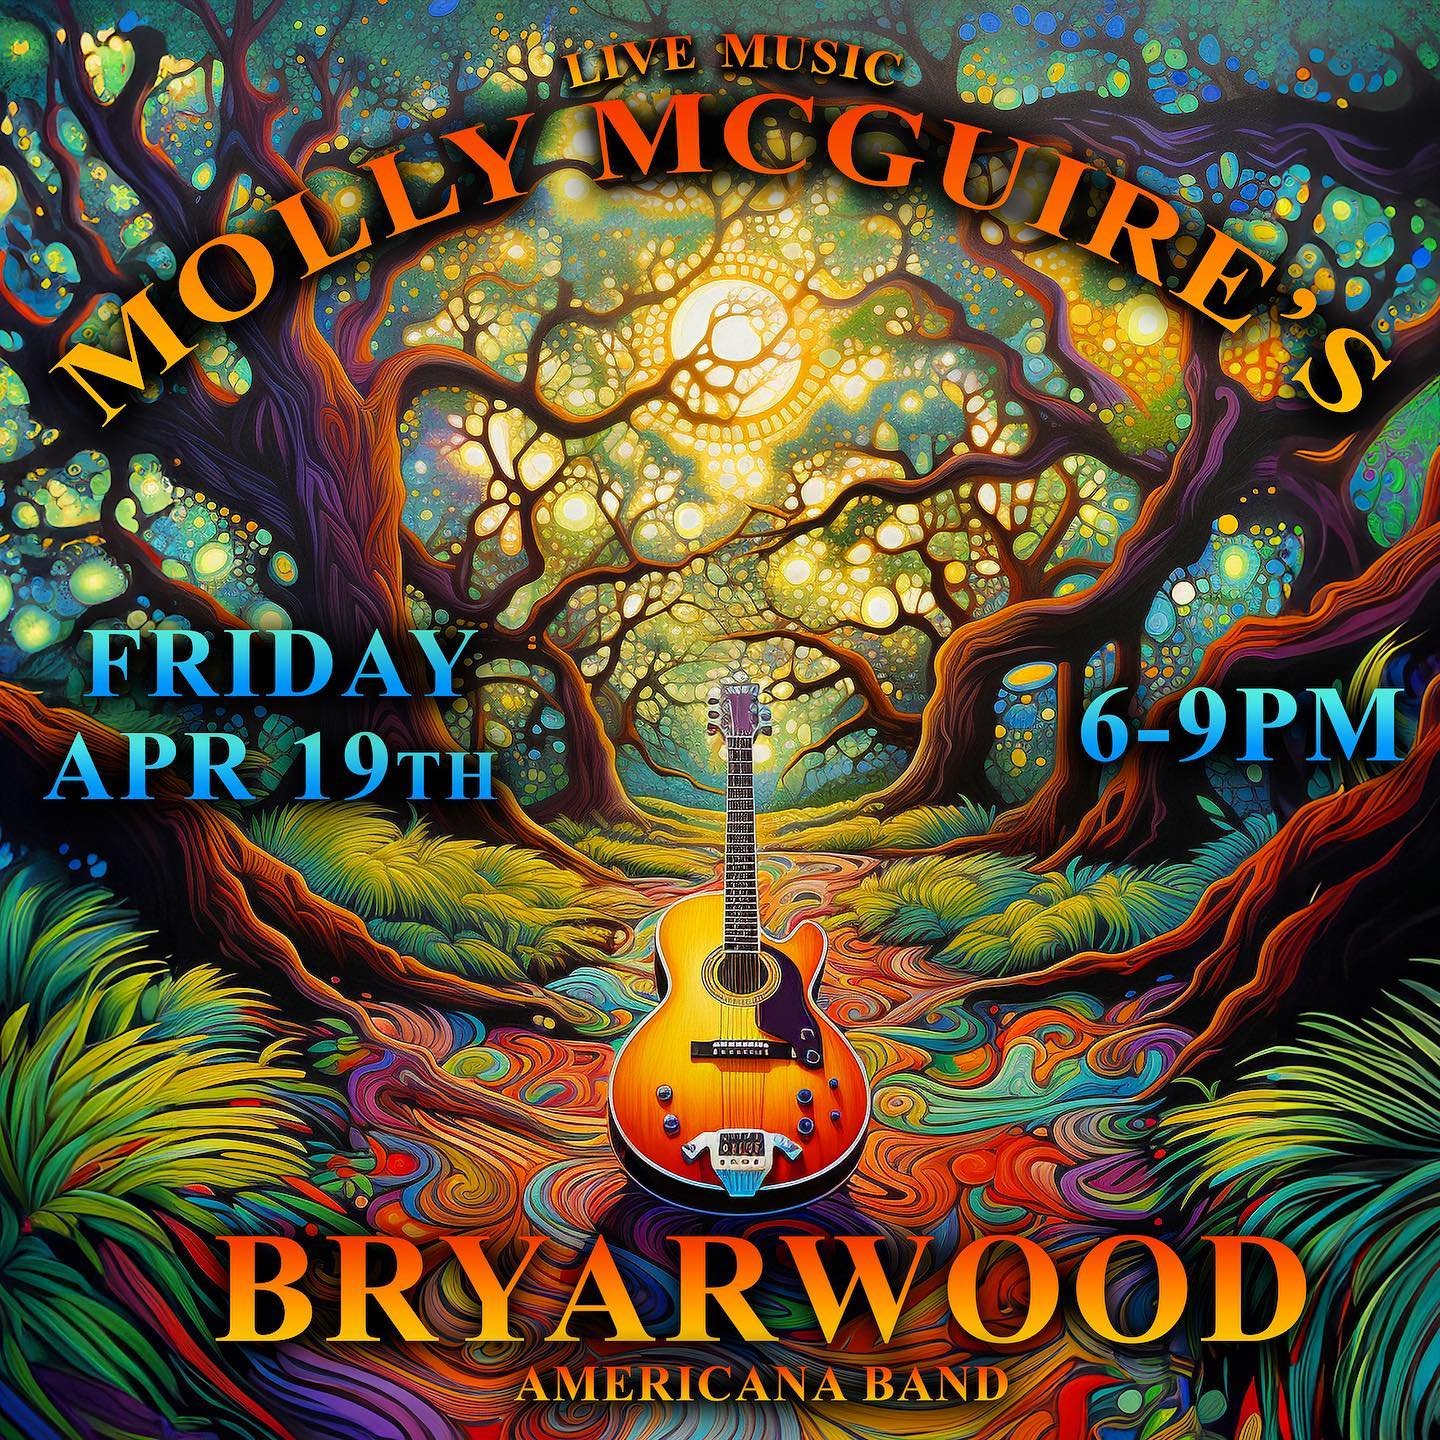 Catch myself and Bryarwood live this weekend at @mollymcguires on Friday night for a rock&rsquo;n good time. #savannah #art912 #concert #livemusic #visitsavannah #music